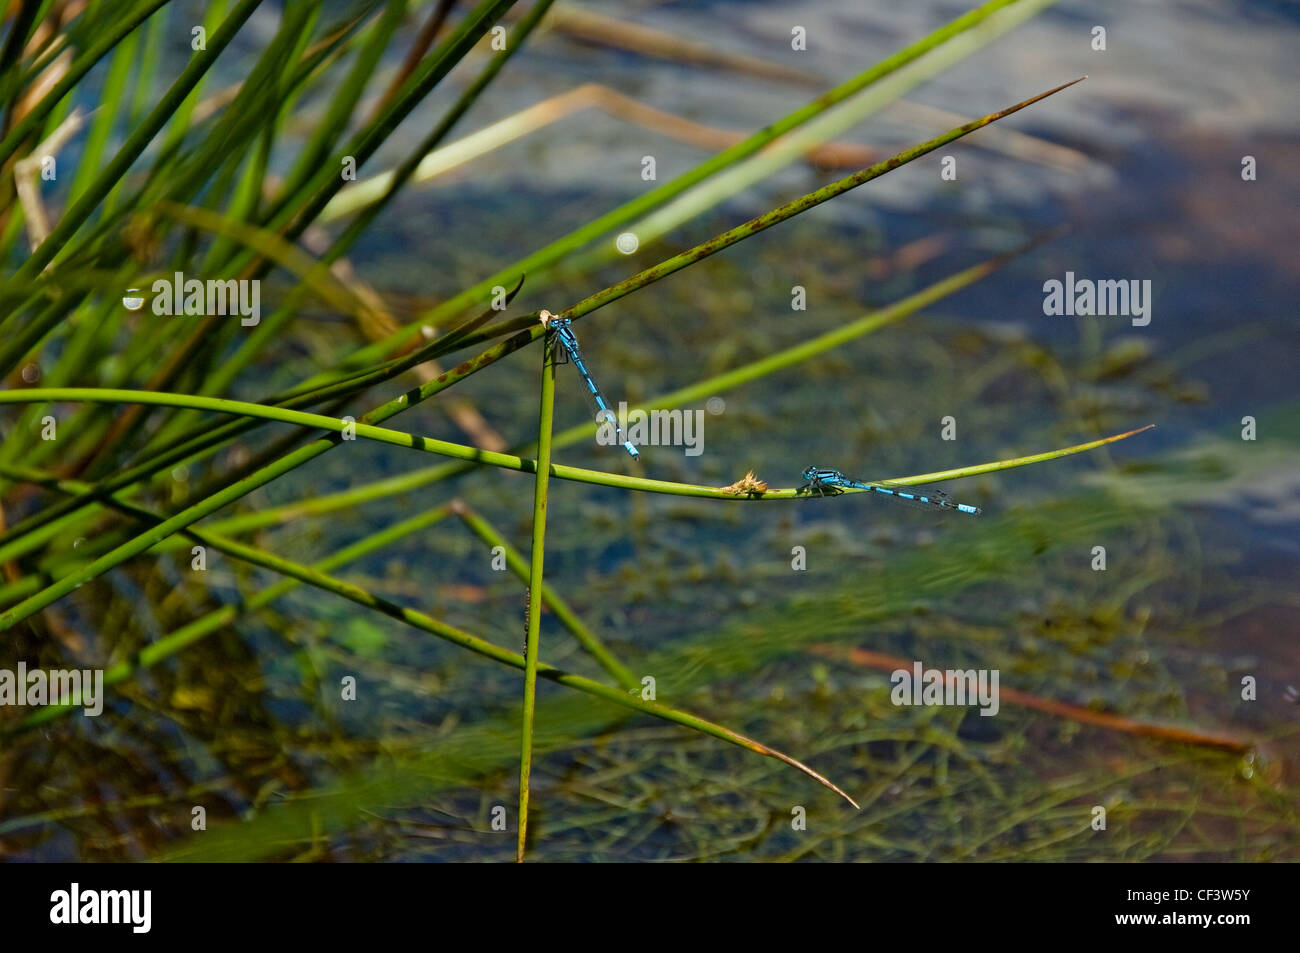 Two Damsel flies clinging to grass stalks near a lake. Stock Photo